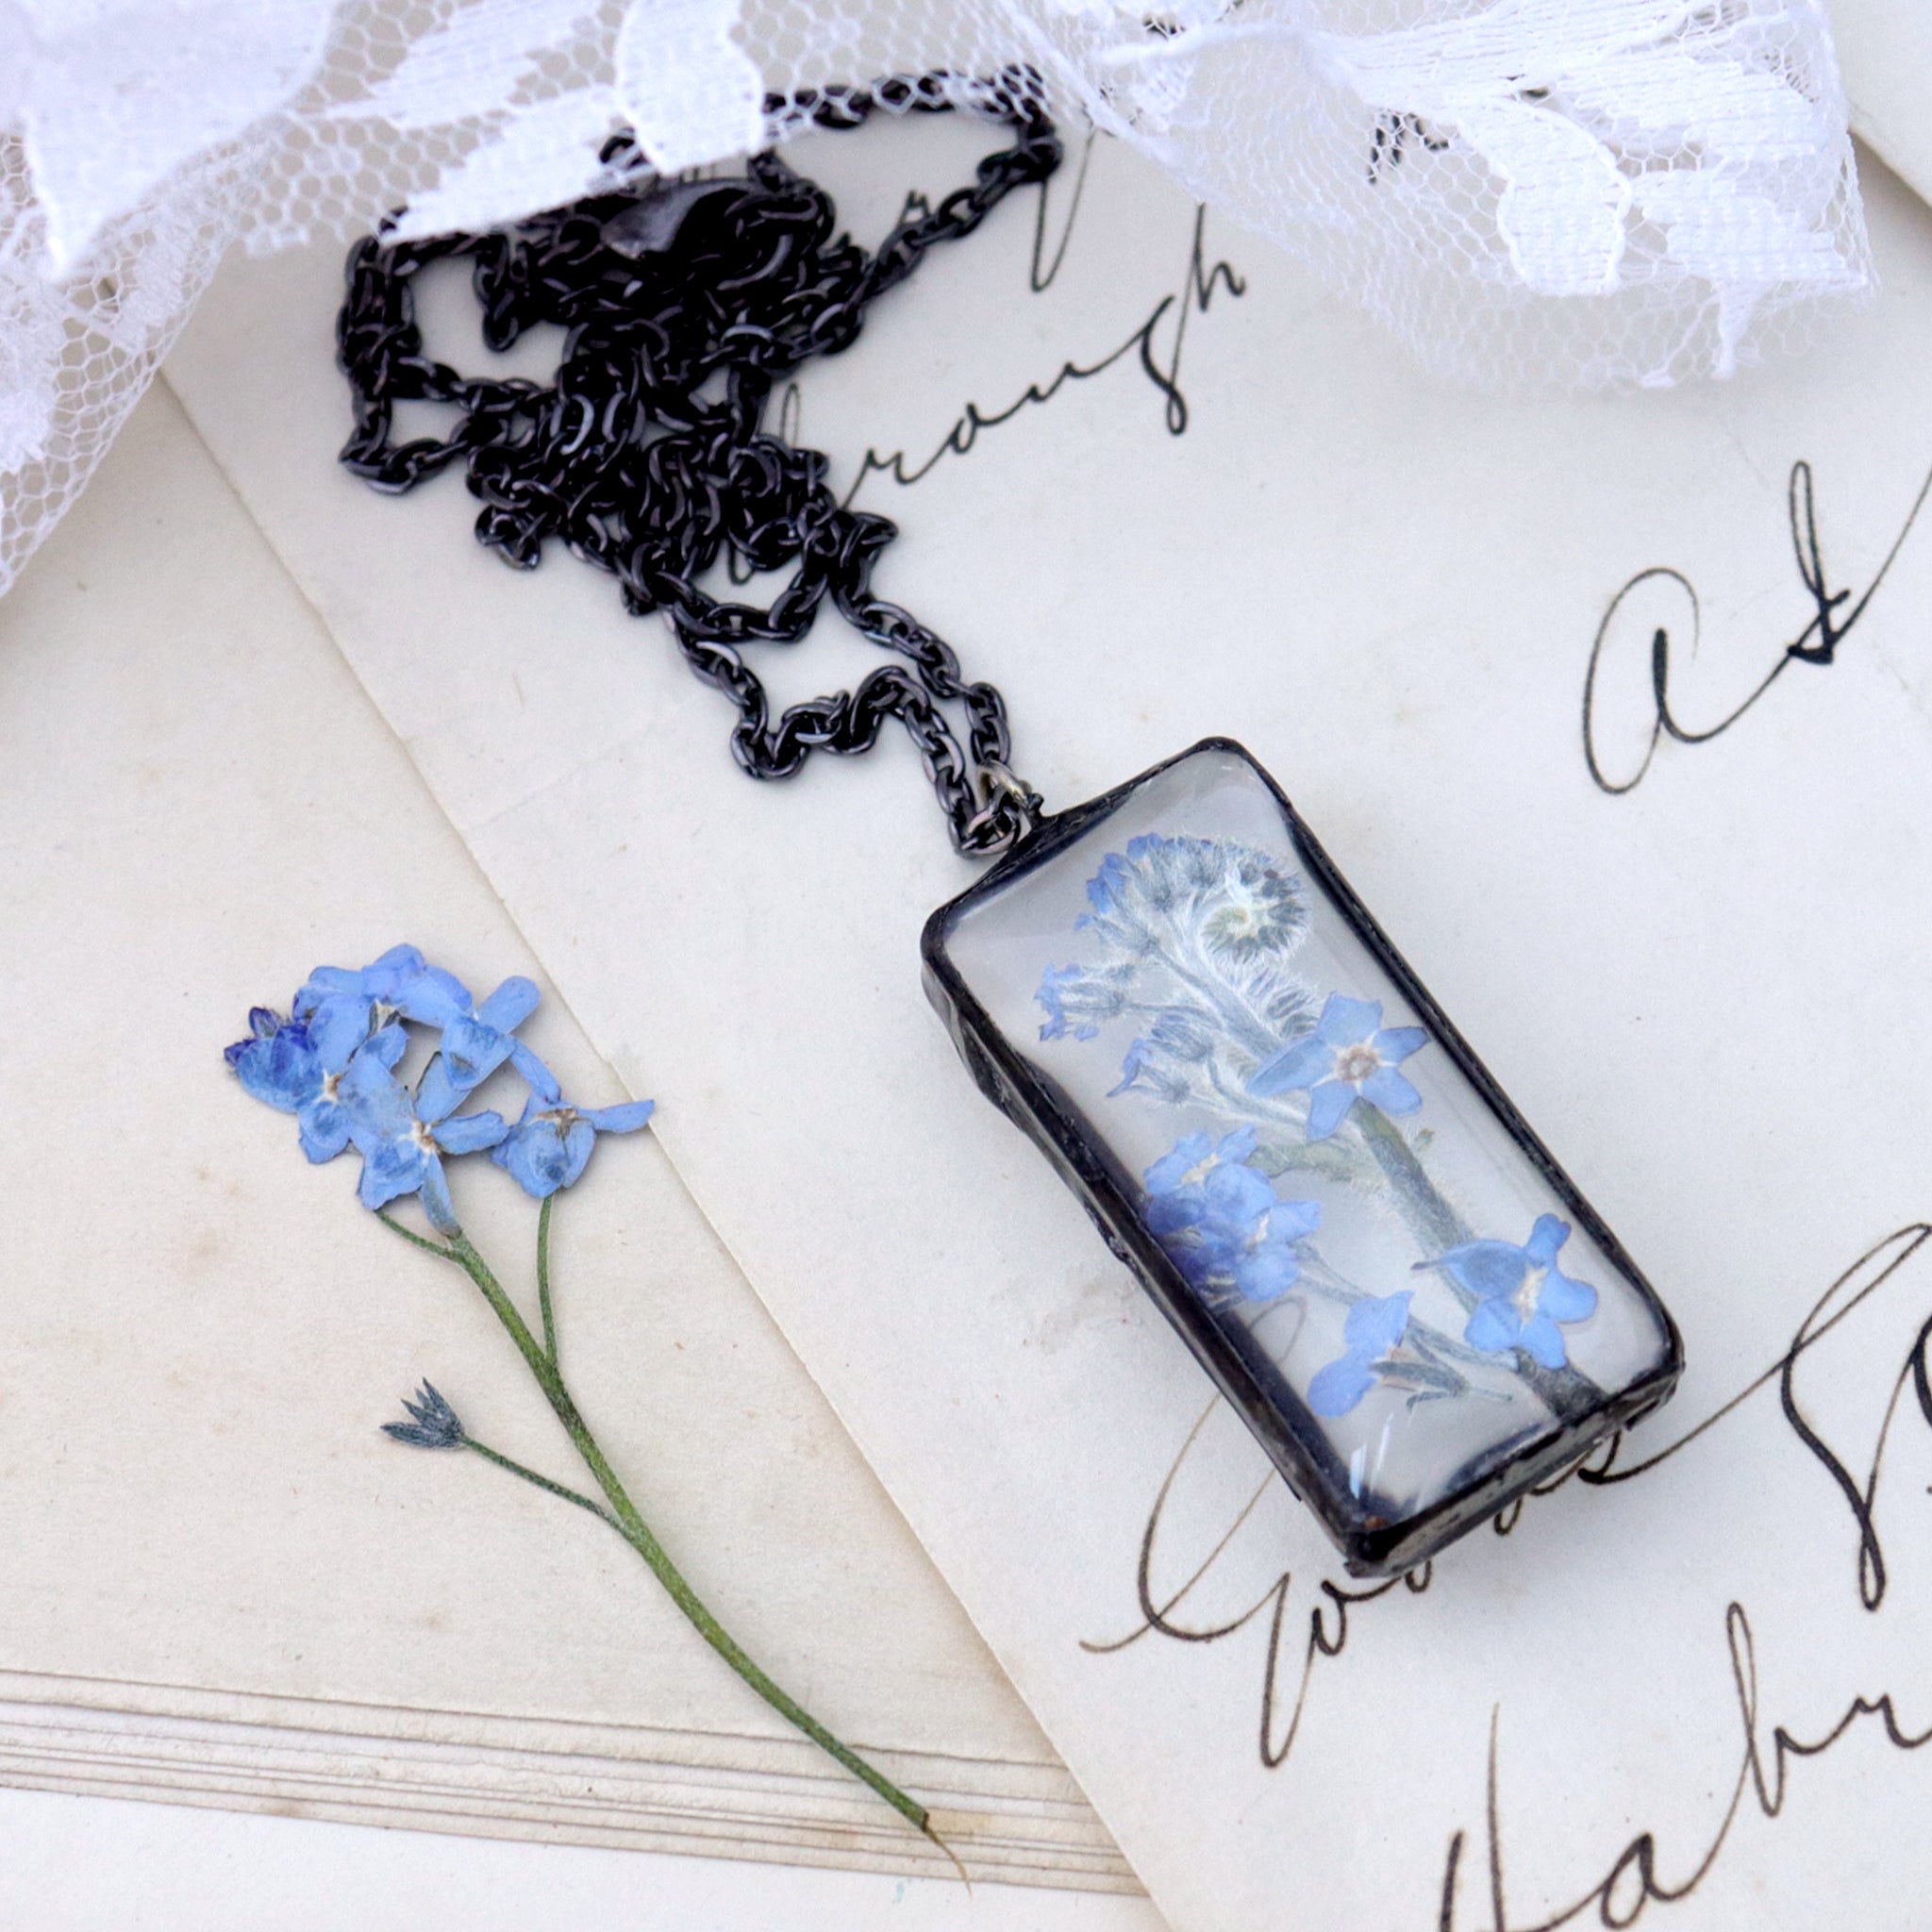 rectangular Forget-me-not necklaces lying on an old book